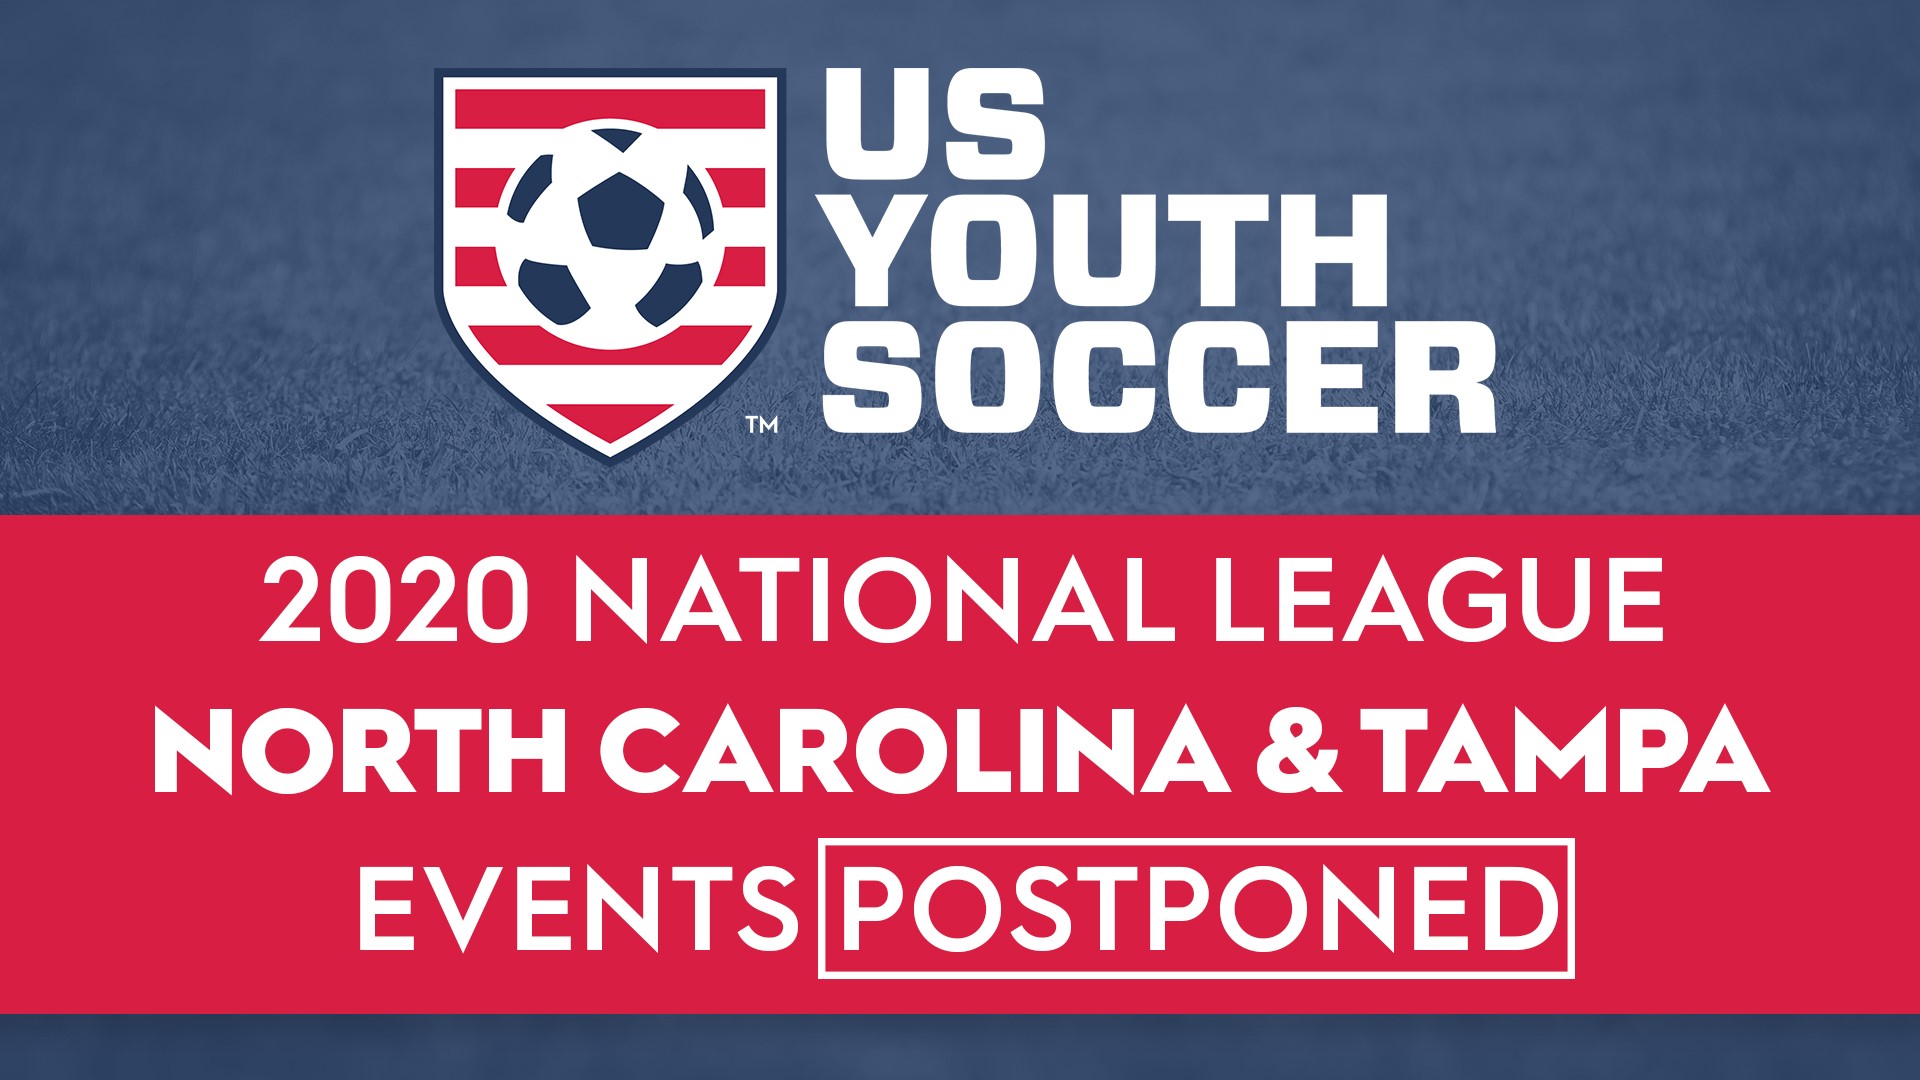 US Youth Soccer cancels December events